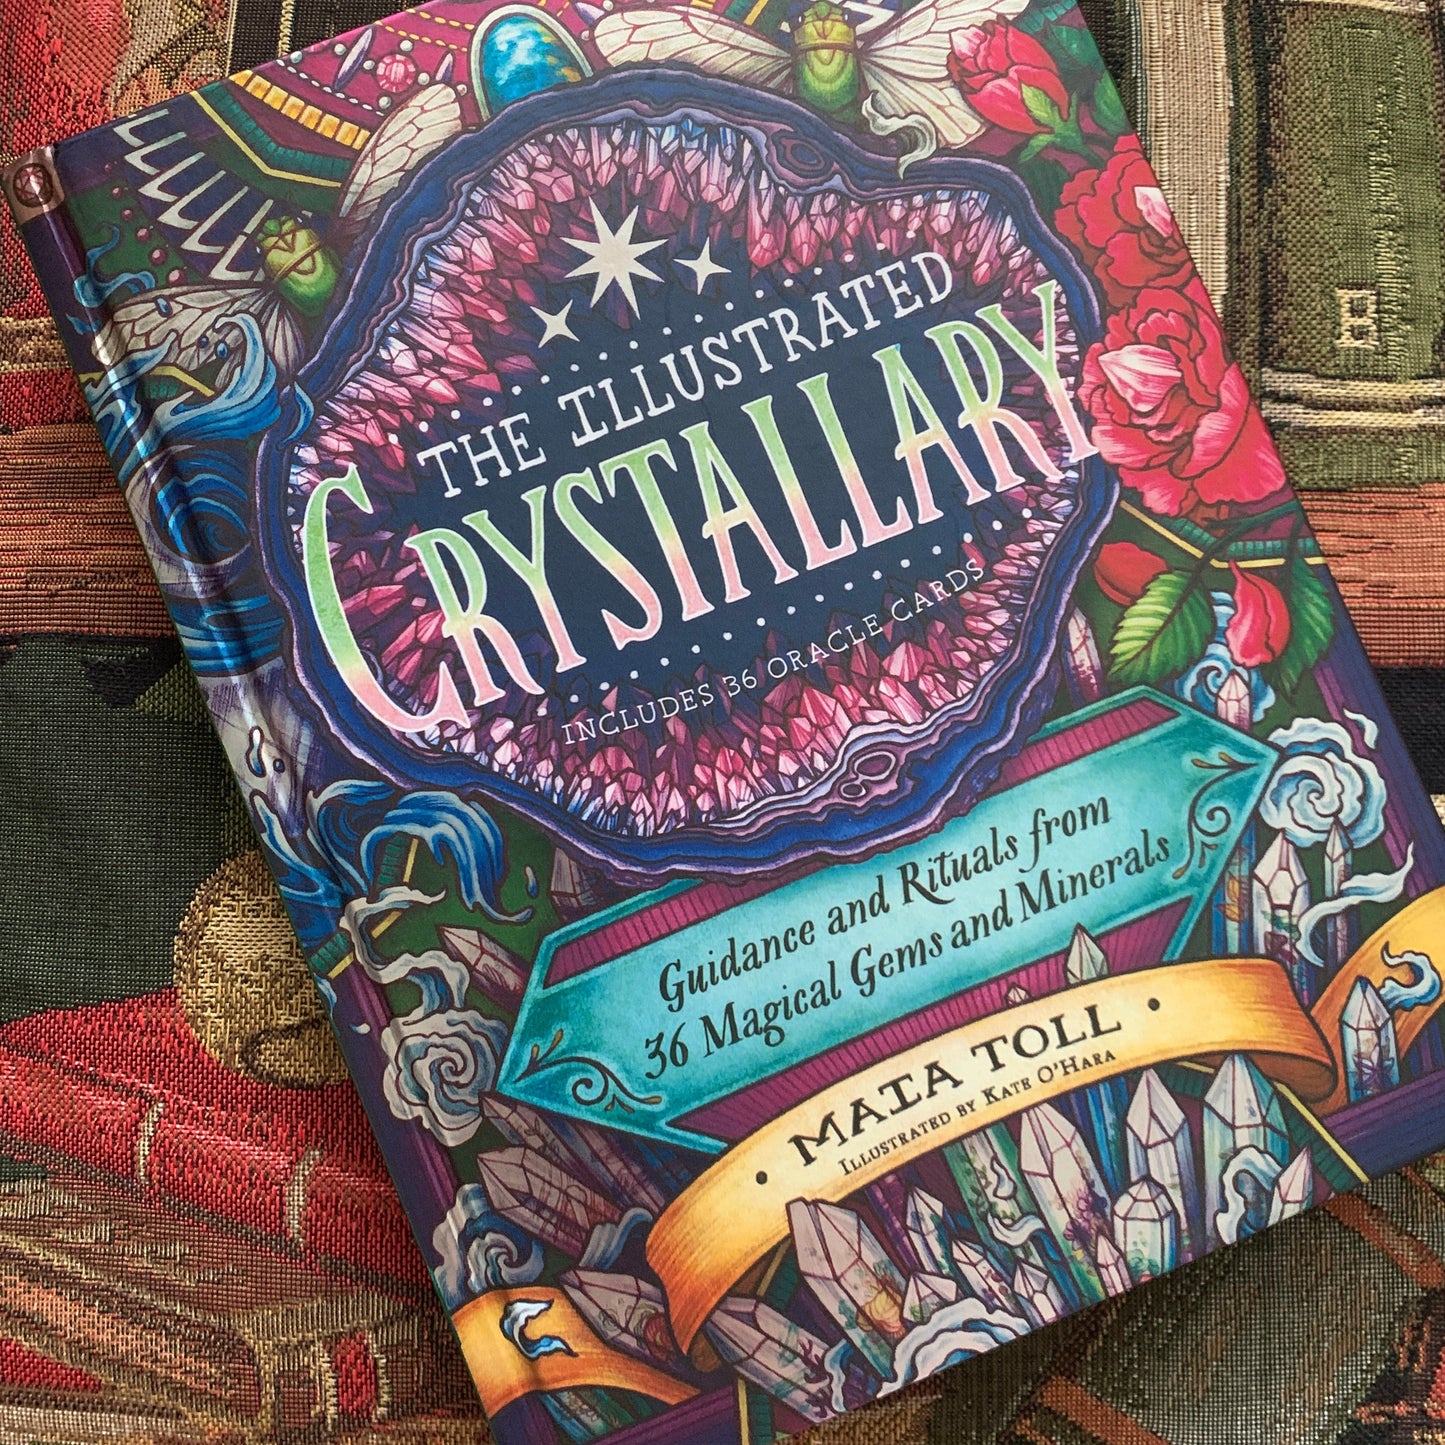 Illustrated Crystallary (Hardcover) + 36 Oracle Cards Guidance and Rituals from 36 Magical Gems and Minerals